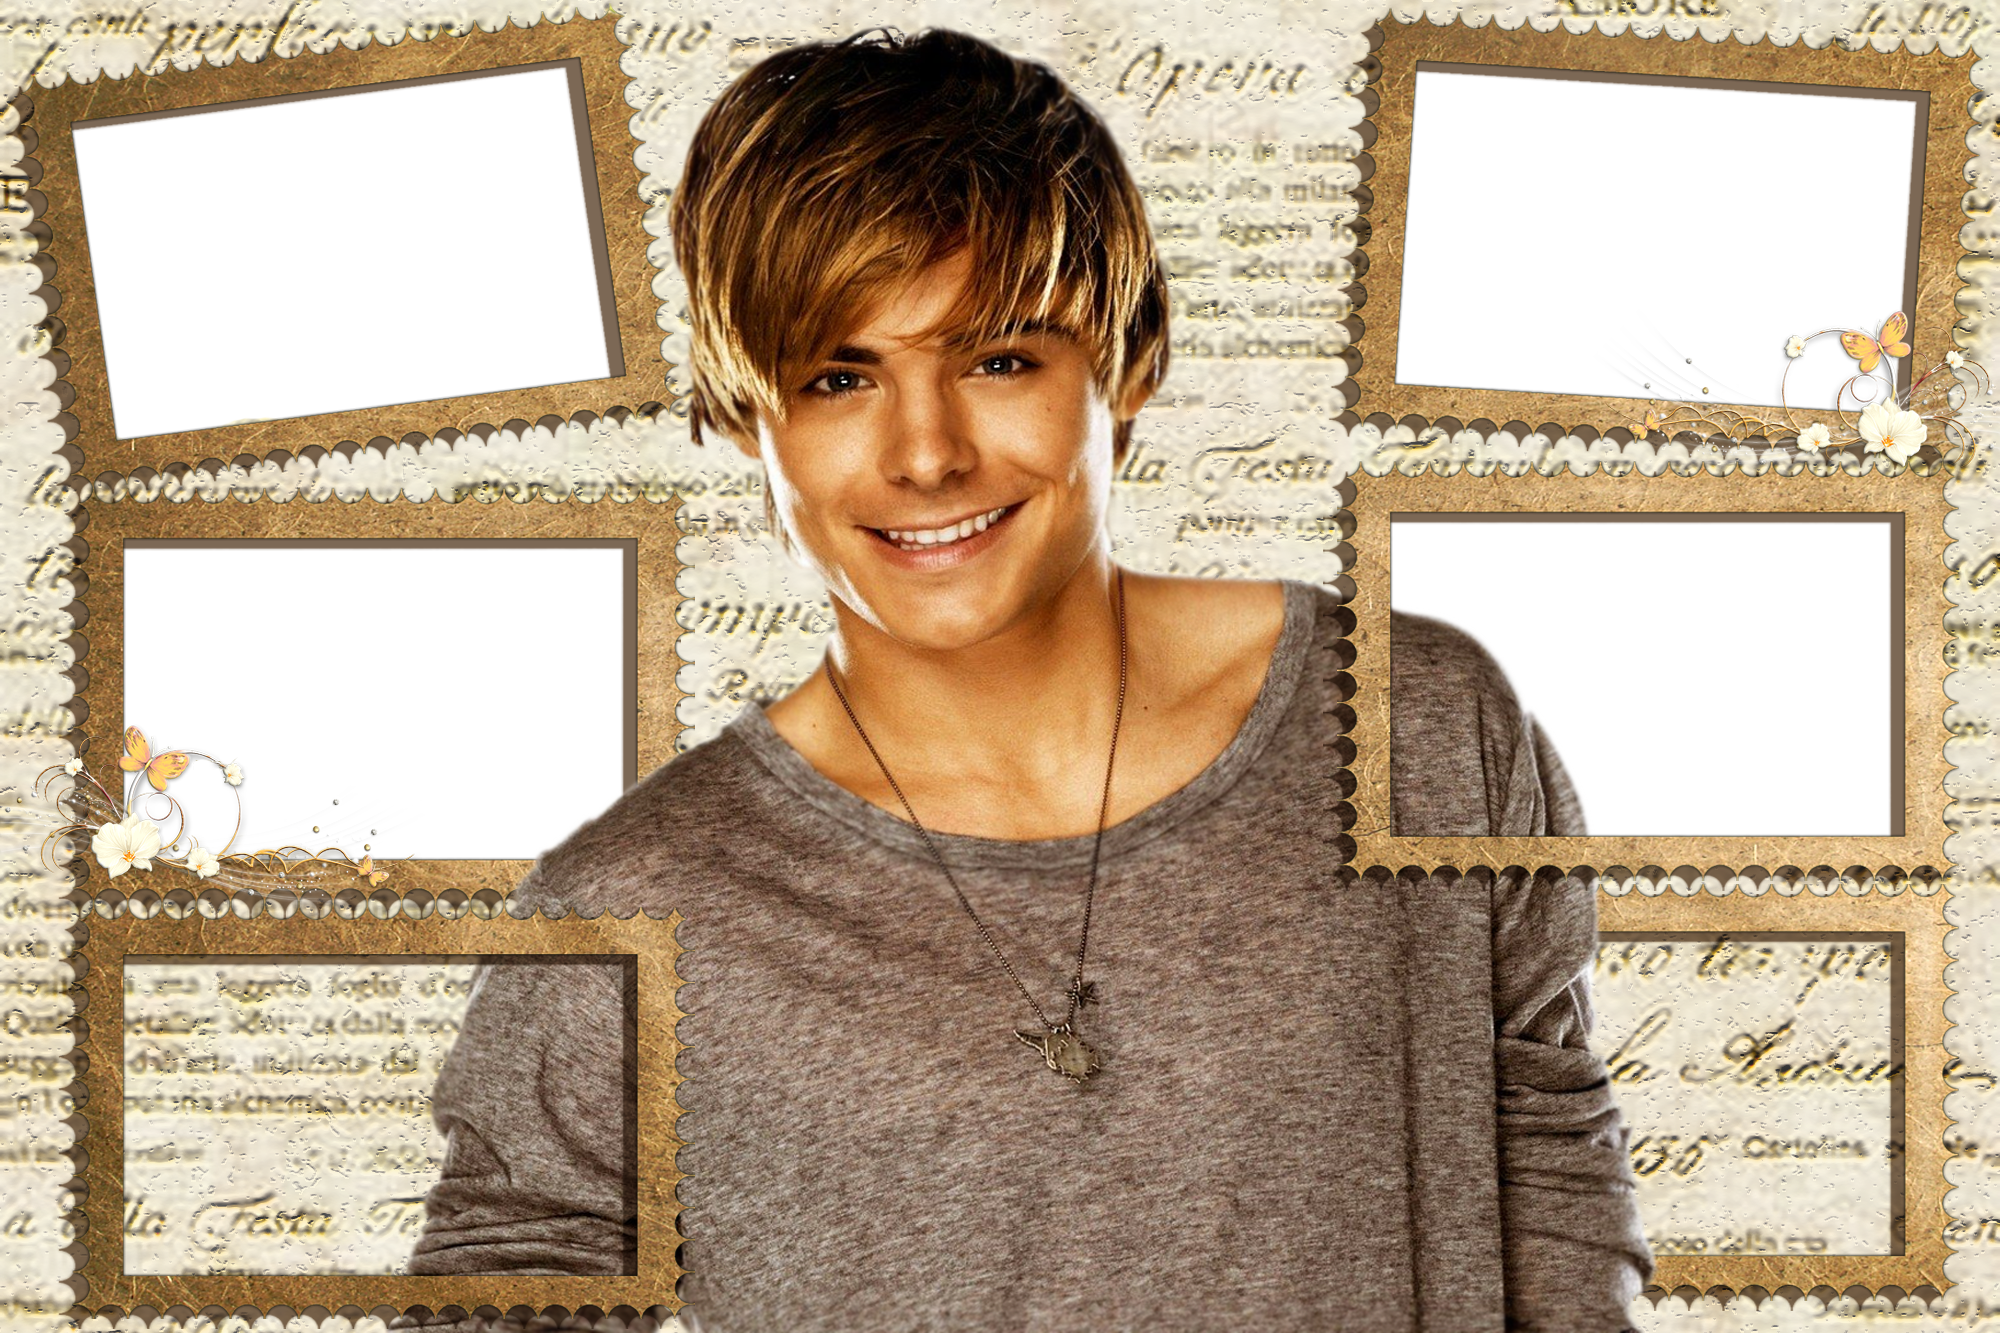 High school musical - Zac_Efron_2.png